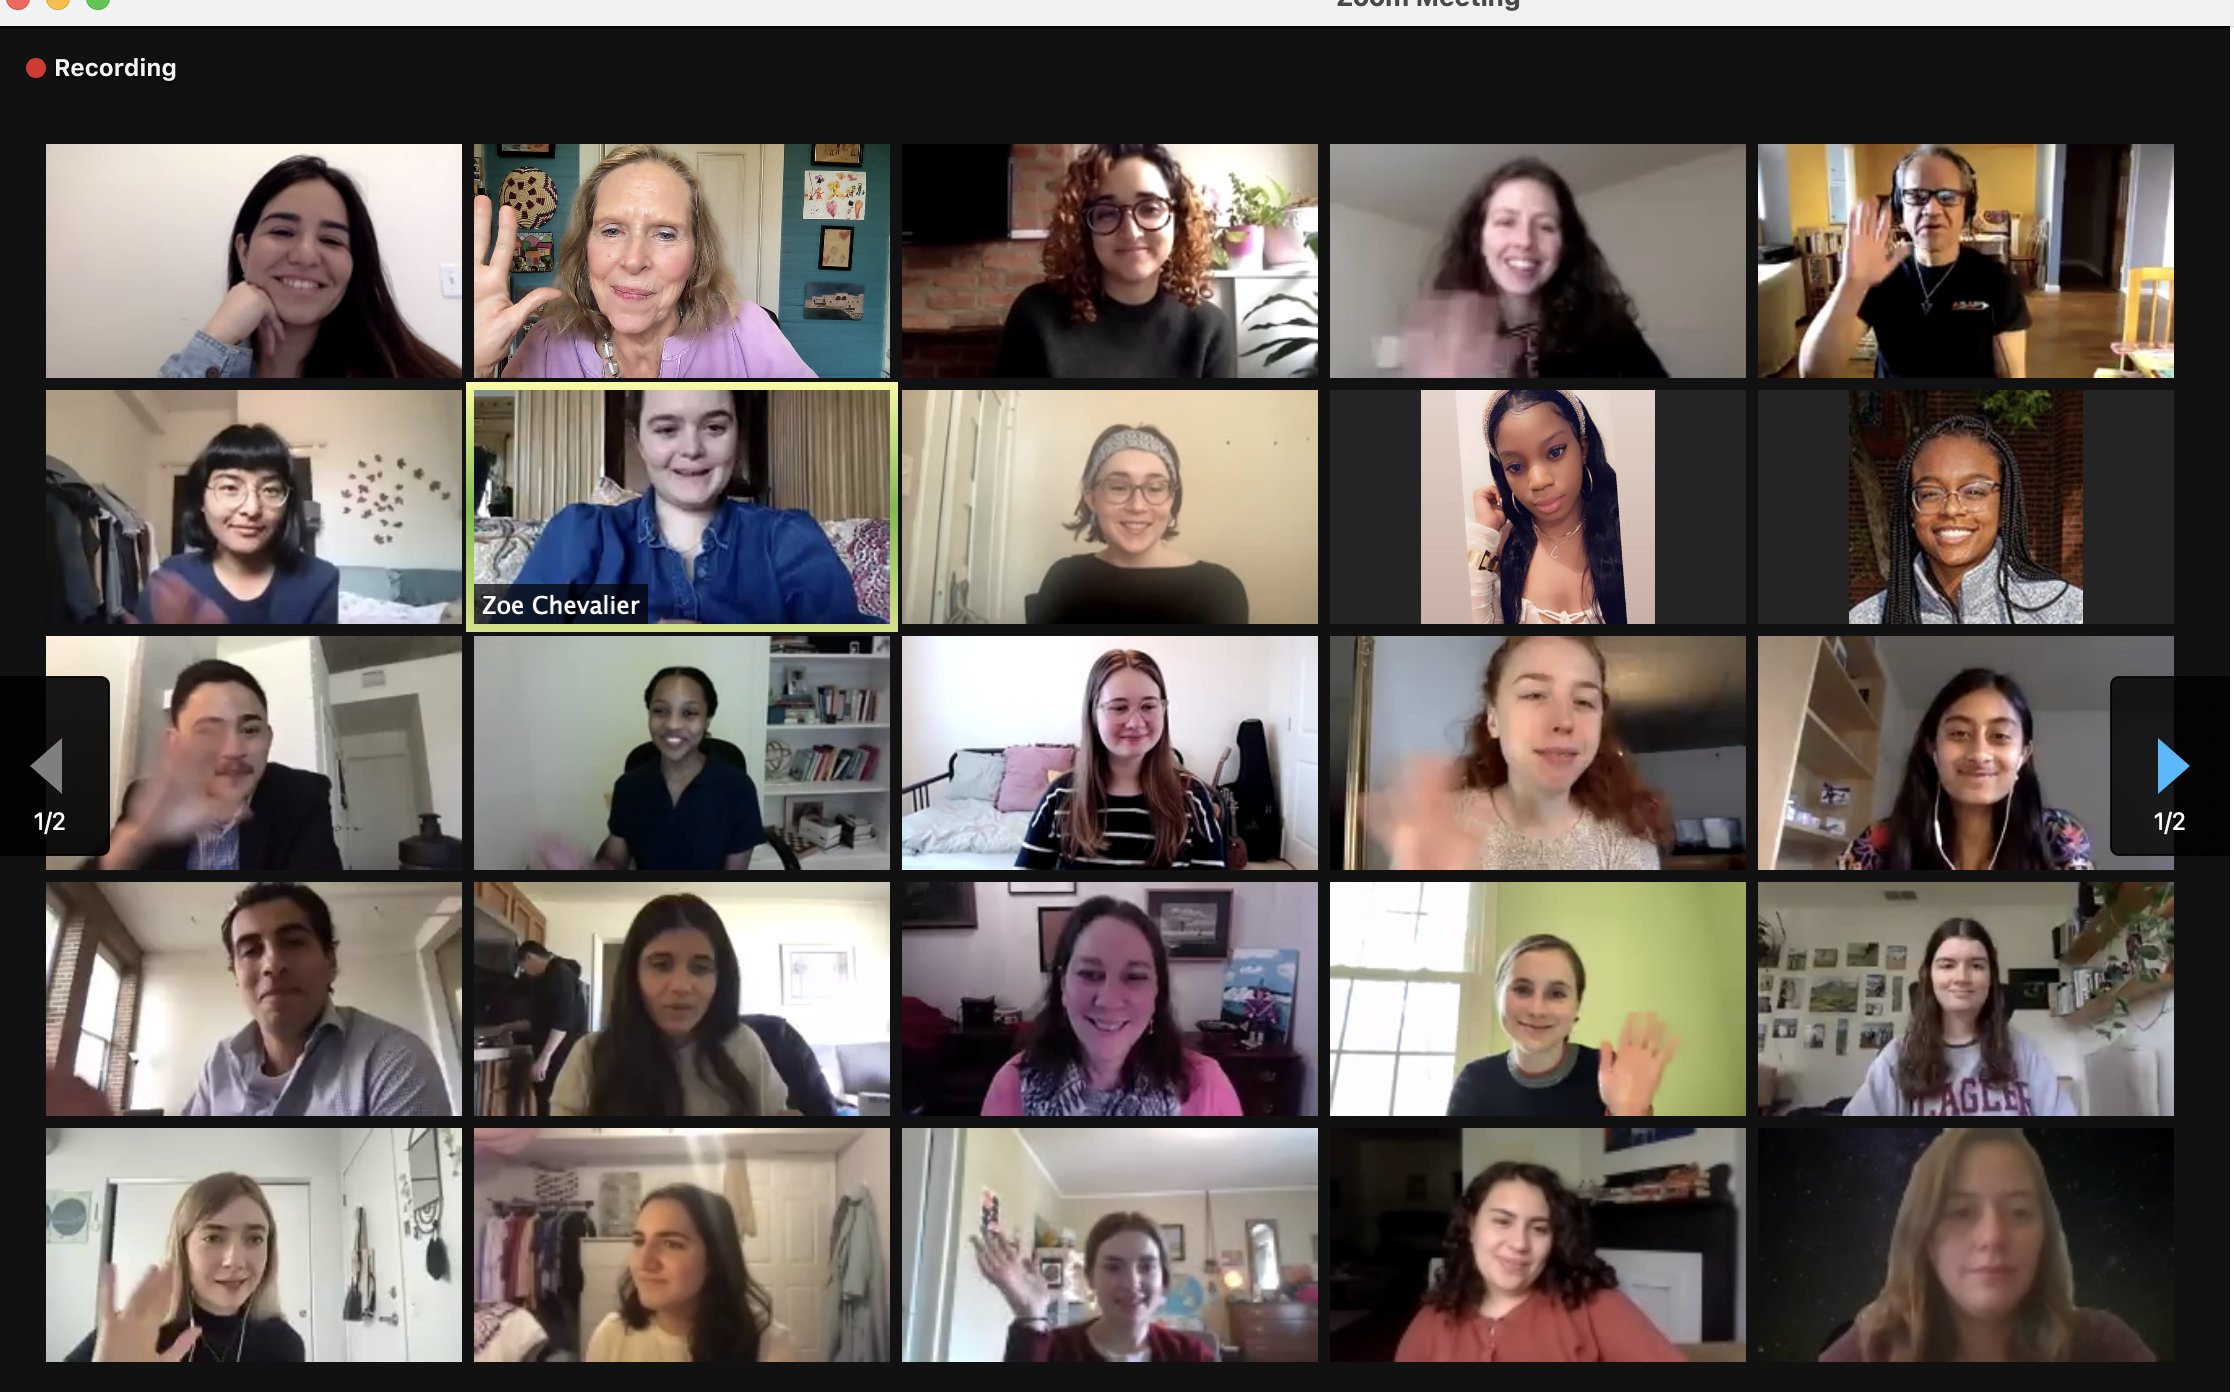 A Zoom screenshot of the reportig fellows who attended the 2021 mini conference